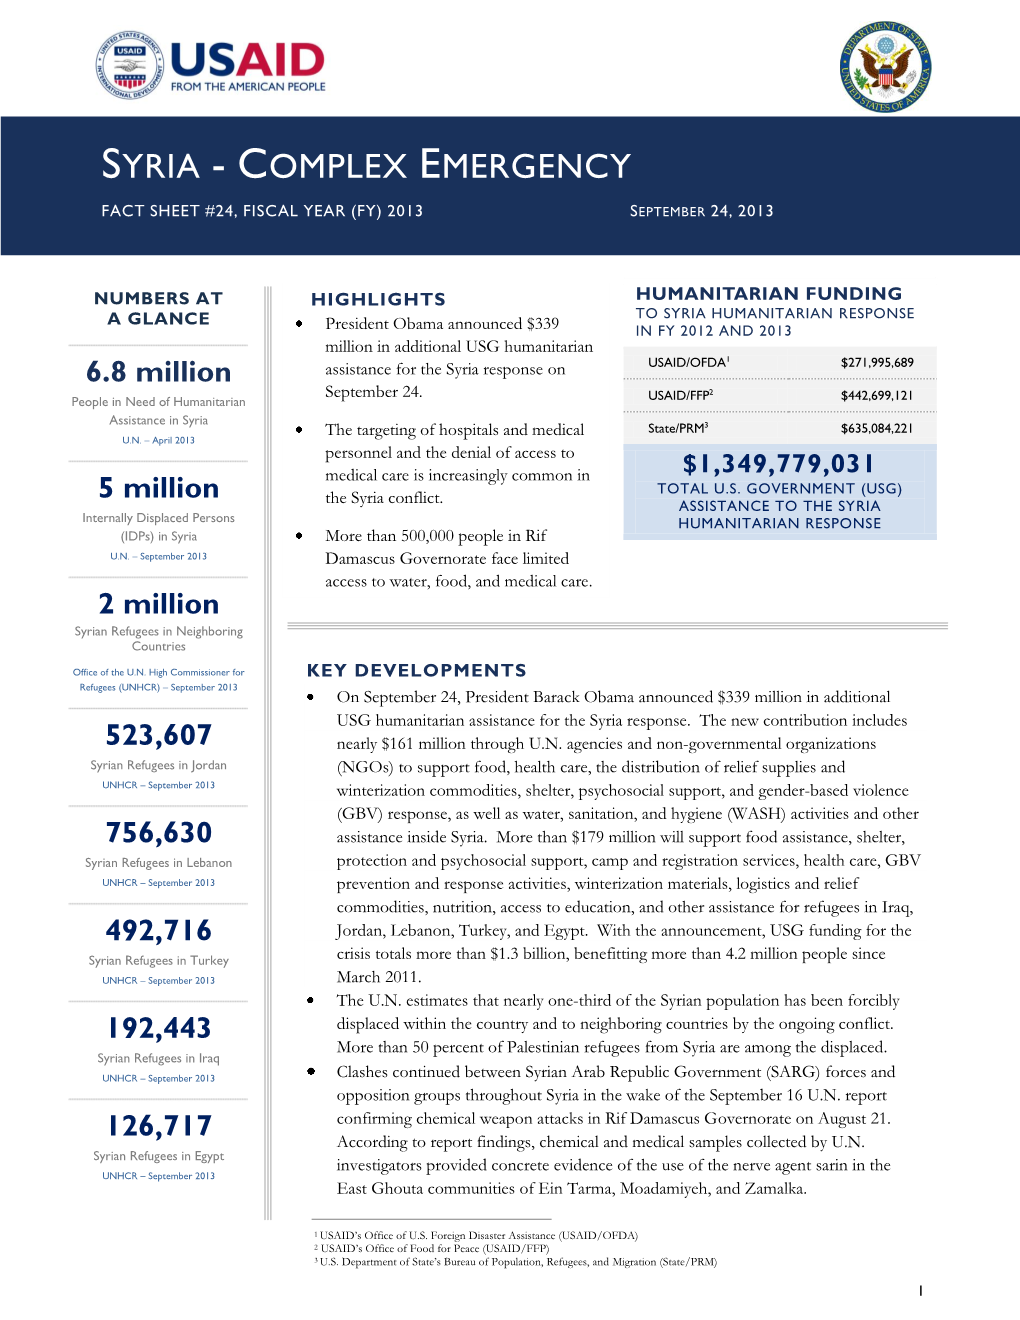 Syria Complex Emergency Fact Sheet